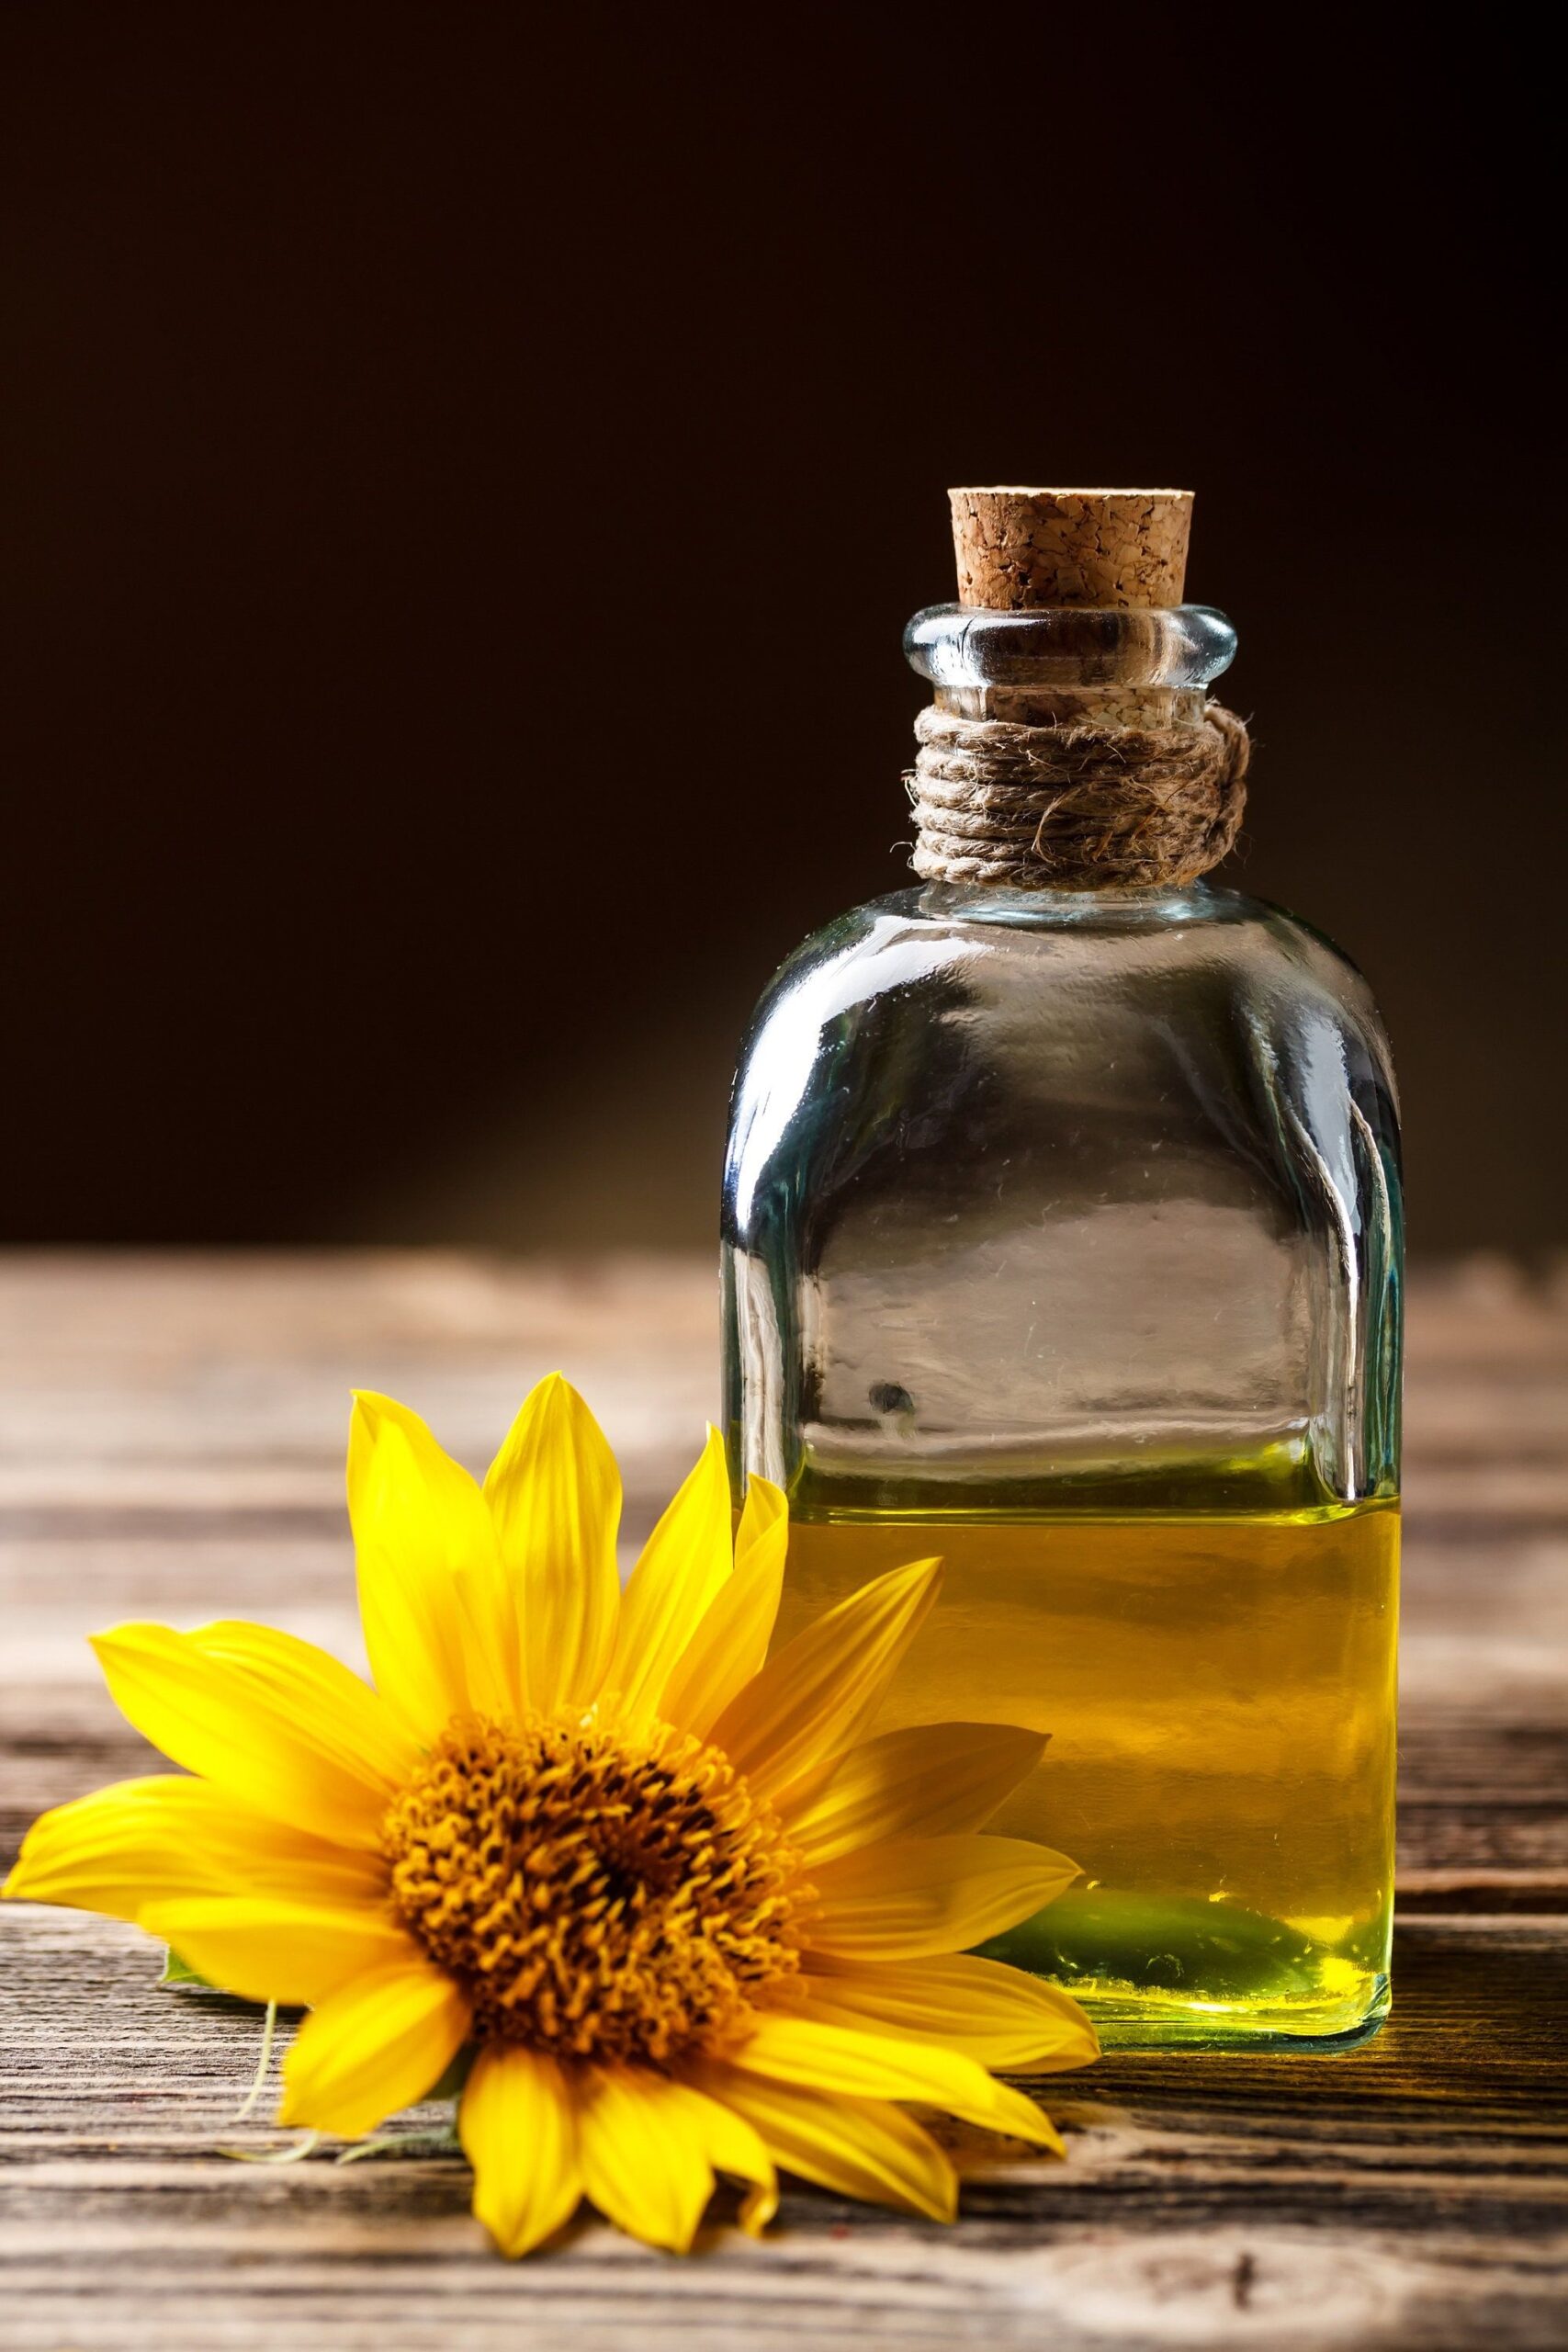 7 Reasons Why Sunflower Oil Is One of the Most Popular Ingredients